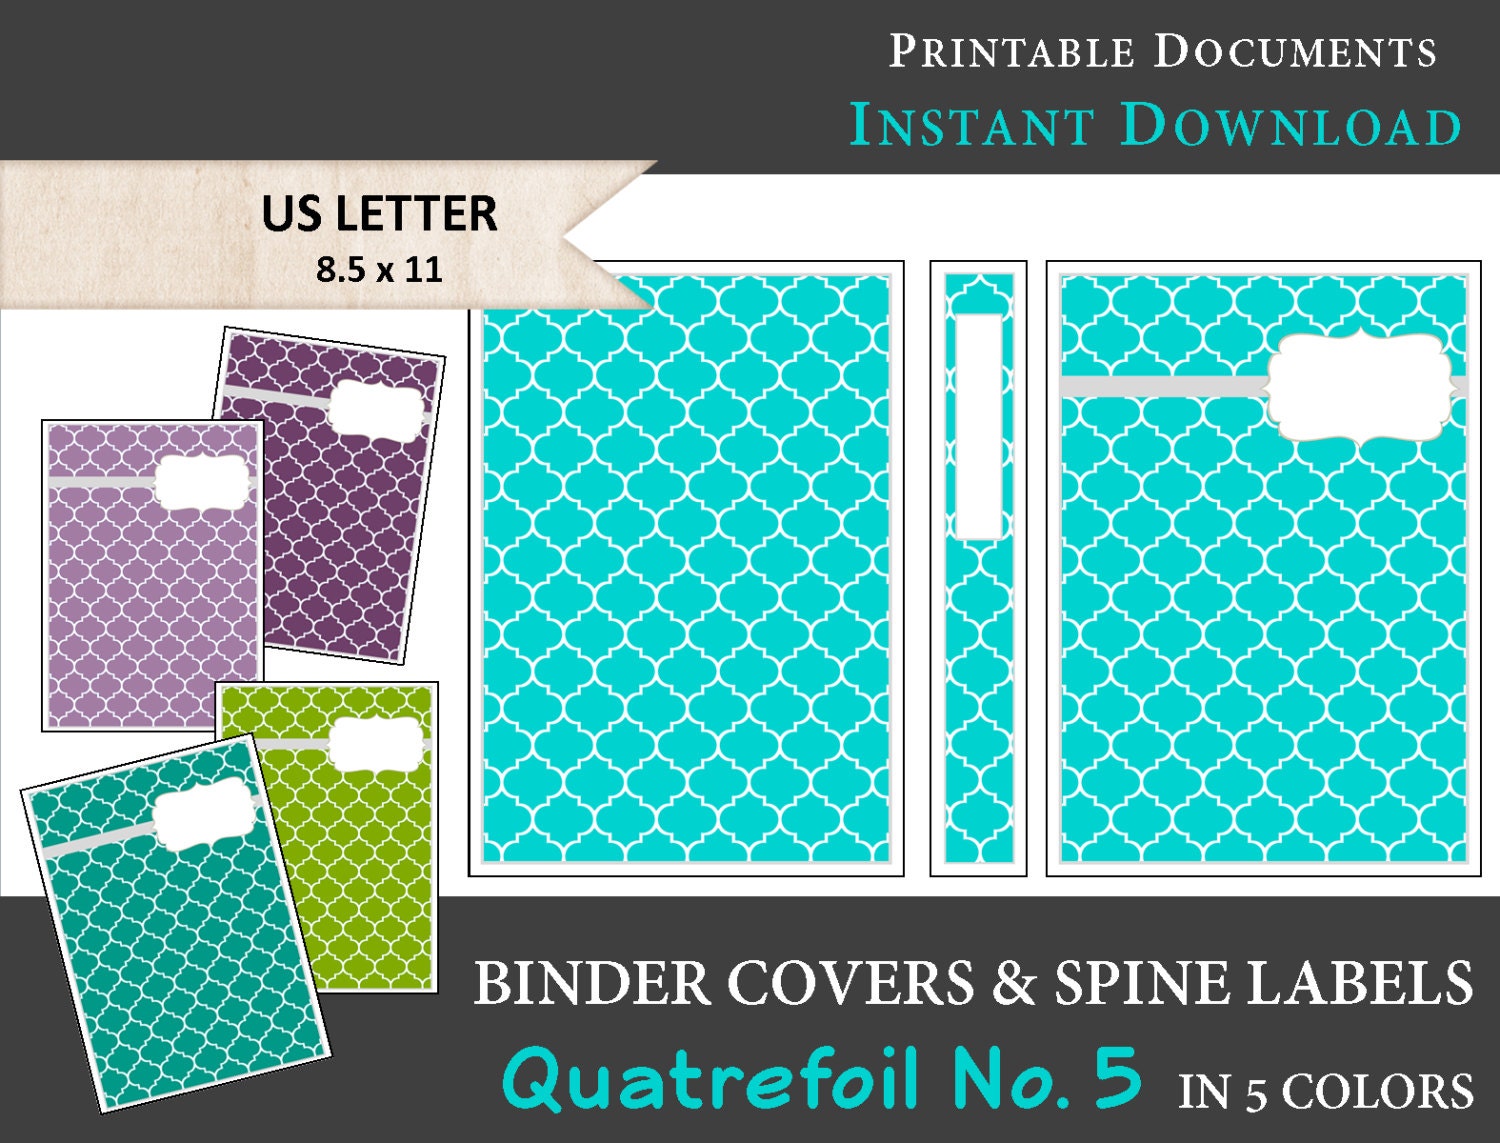 Printable Binder Covers & Spine Label Inserts in 5 Colors: